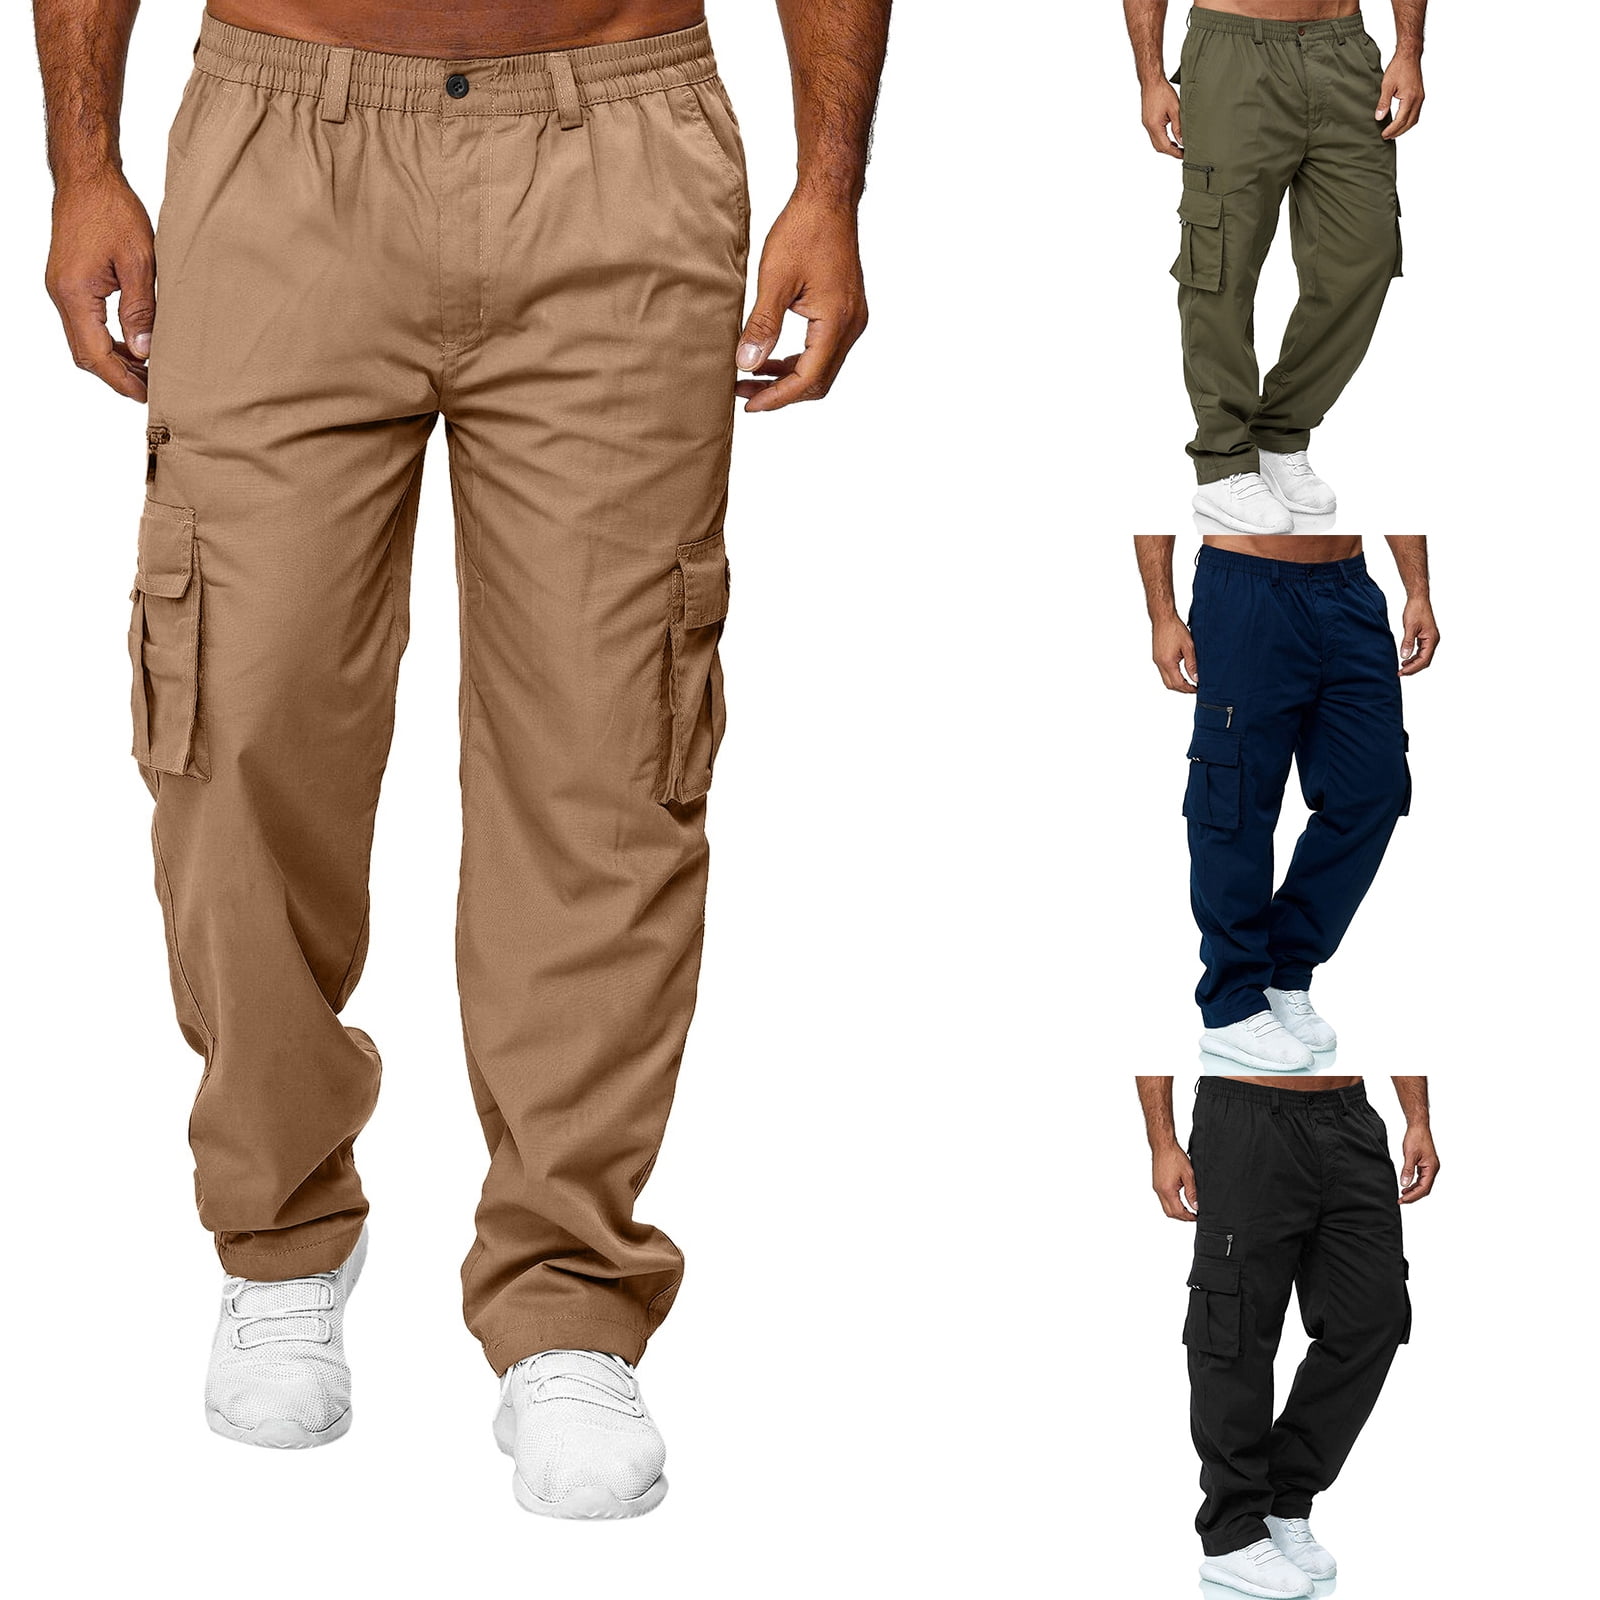 Men's Casual Cargo Pants with Elastic Waist and UK